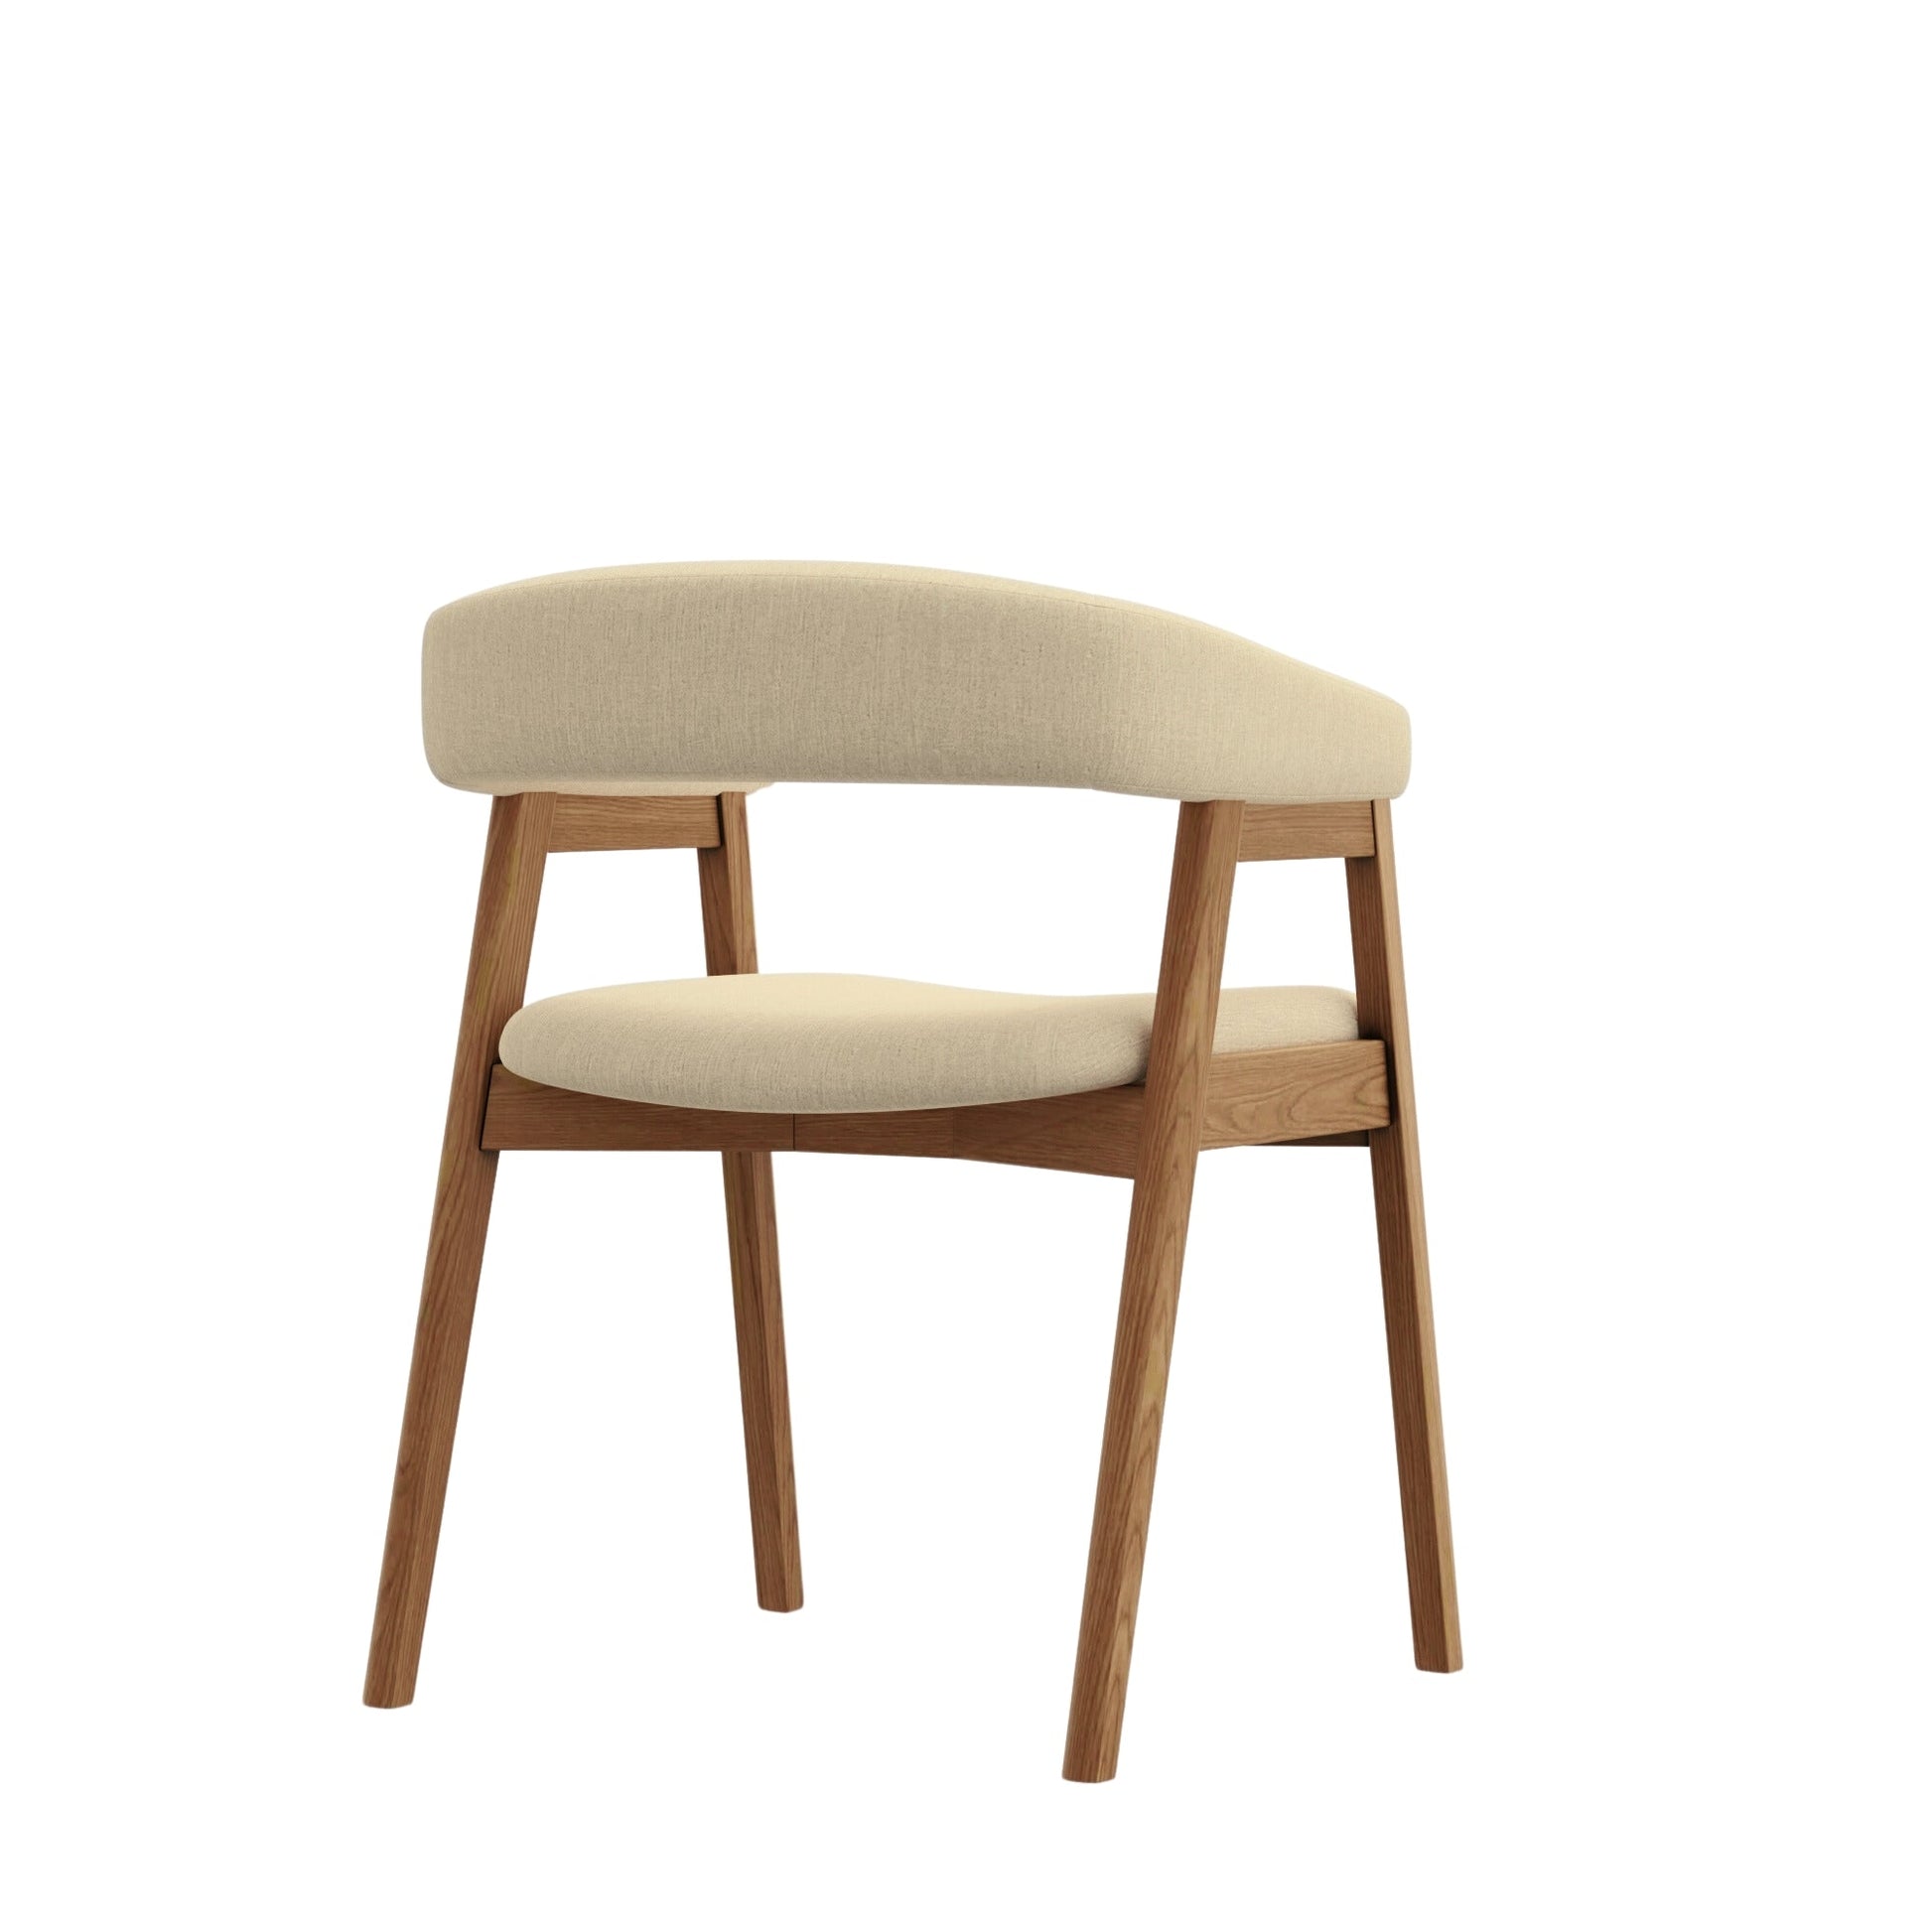 Cove Curved Back Side Chairs - Alpine Furniture